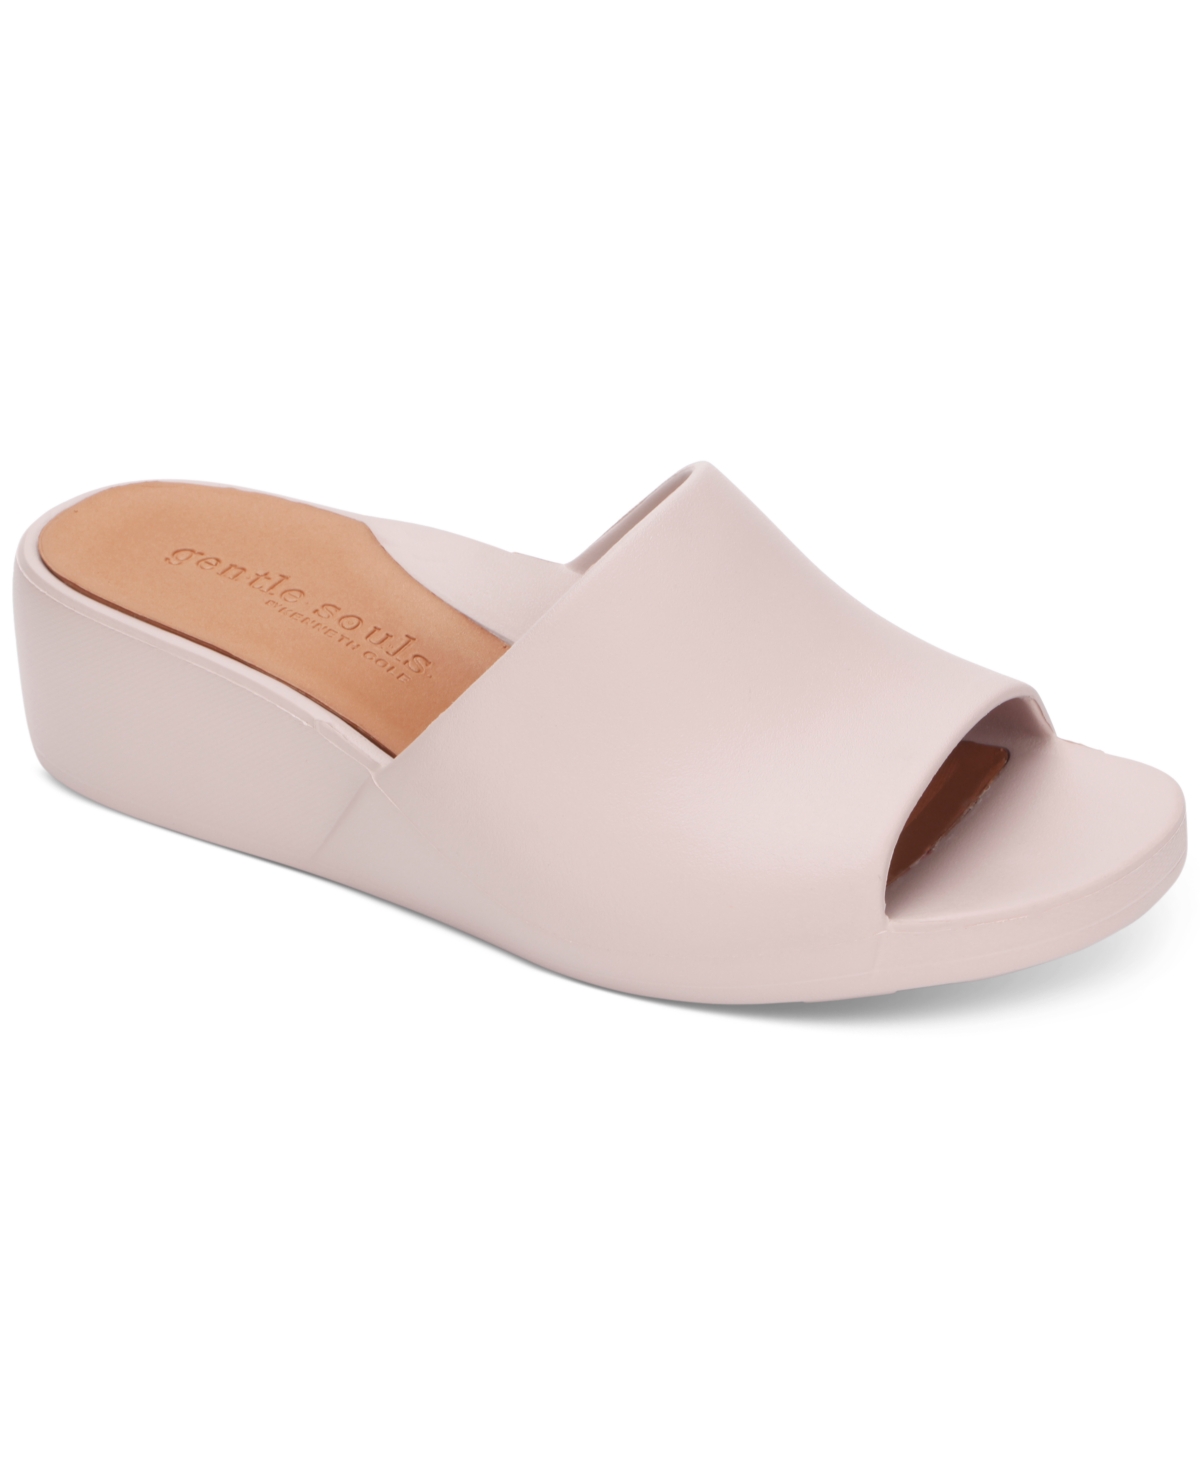 by Kenneth Cole Women's Gisele Wedge Slide Sandals - Lilac